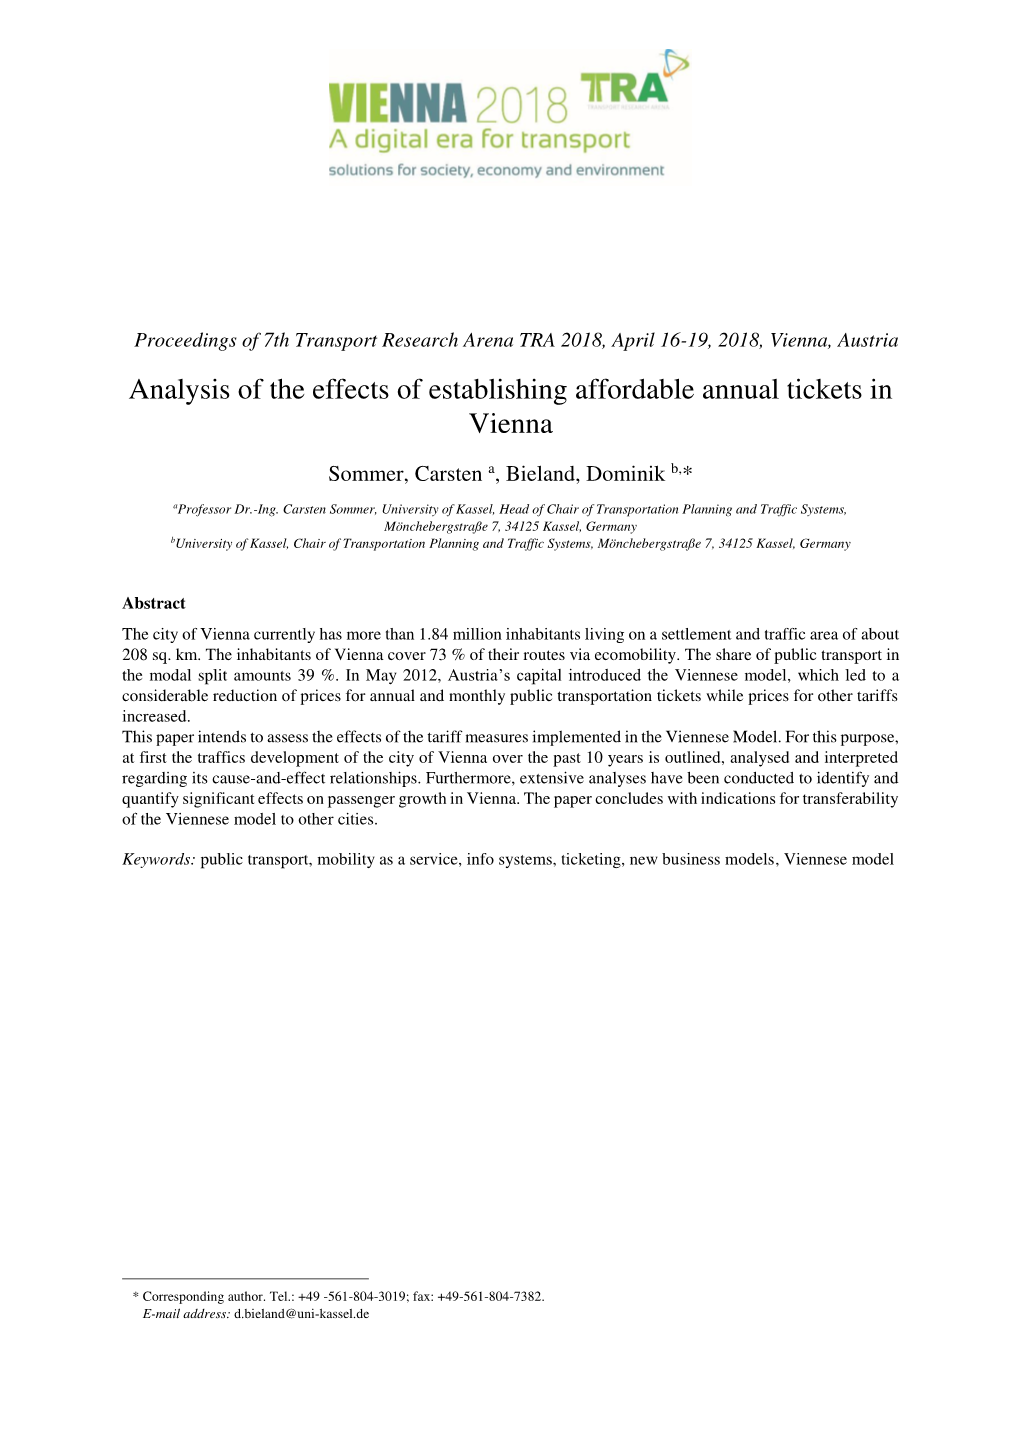 Analysis of the Effects of Establishing Affordable Annual Tickets in Vienna